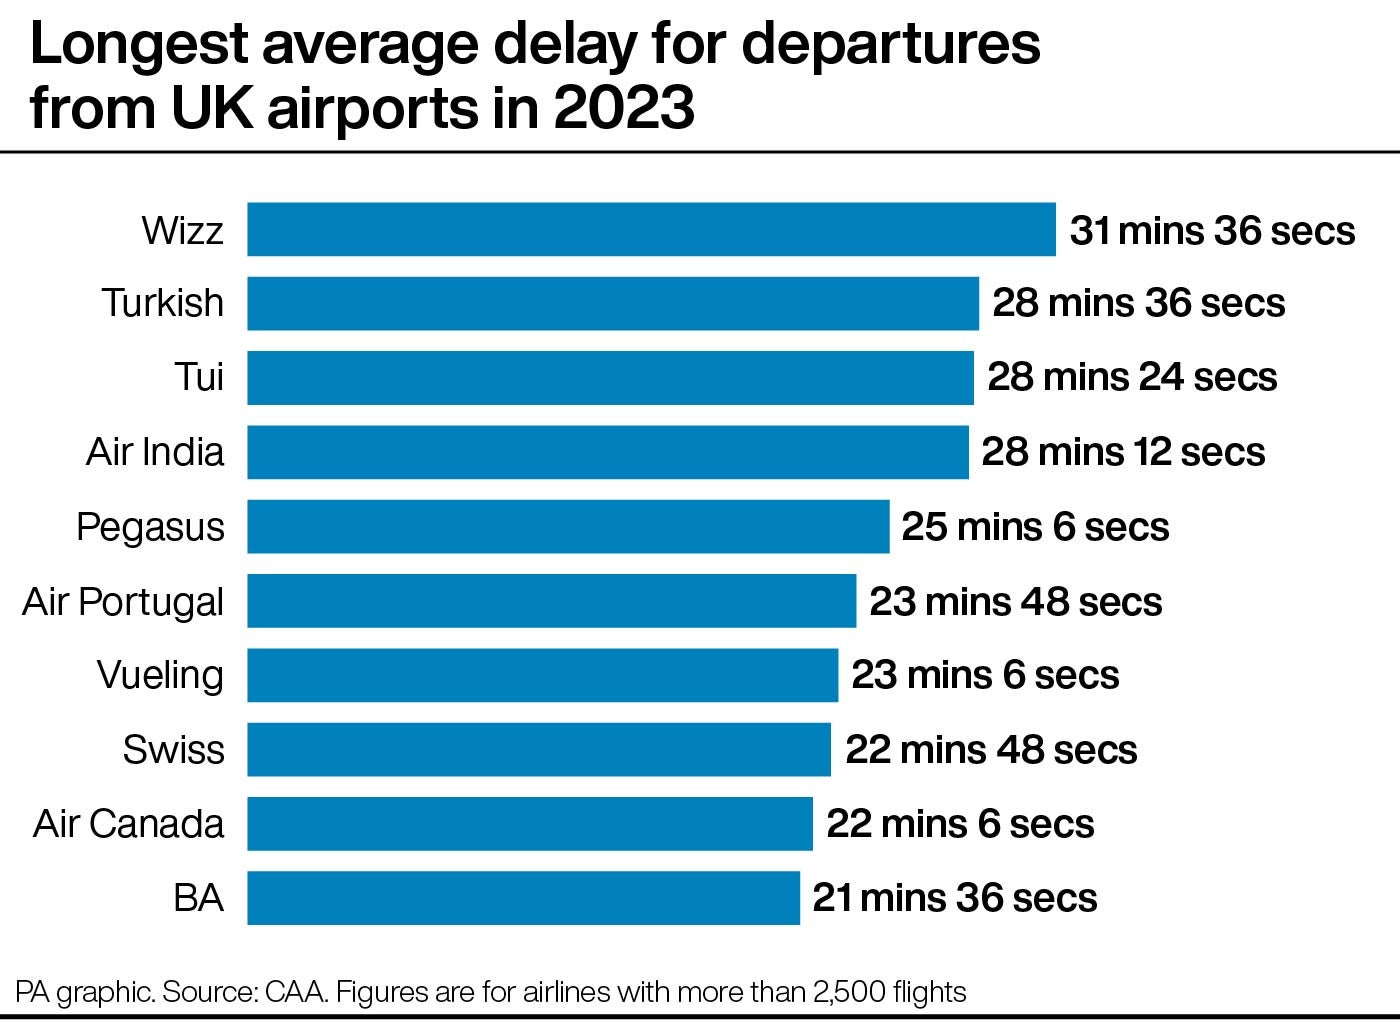 Longest average delay for departures from UK airports in 2023